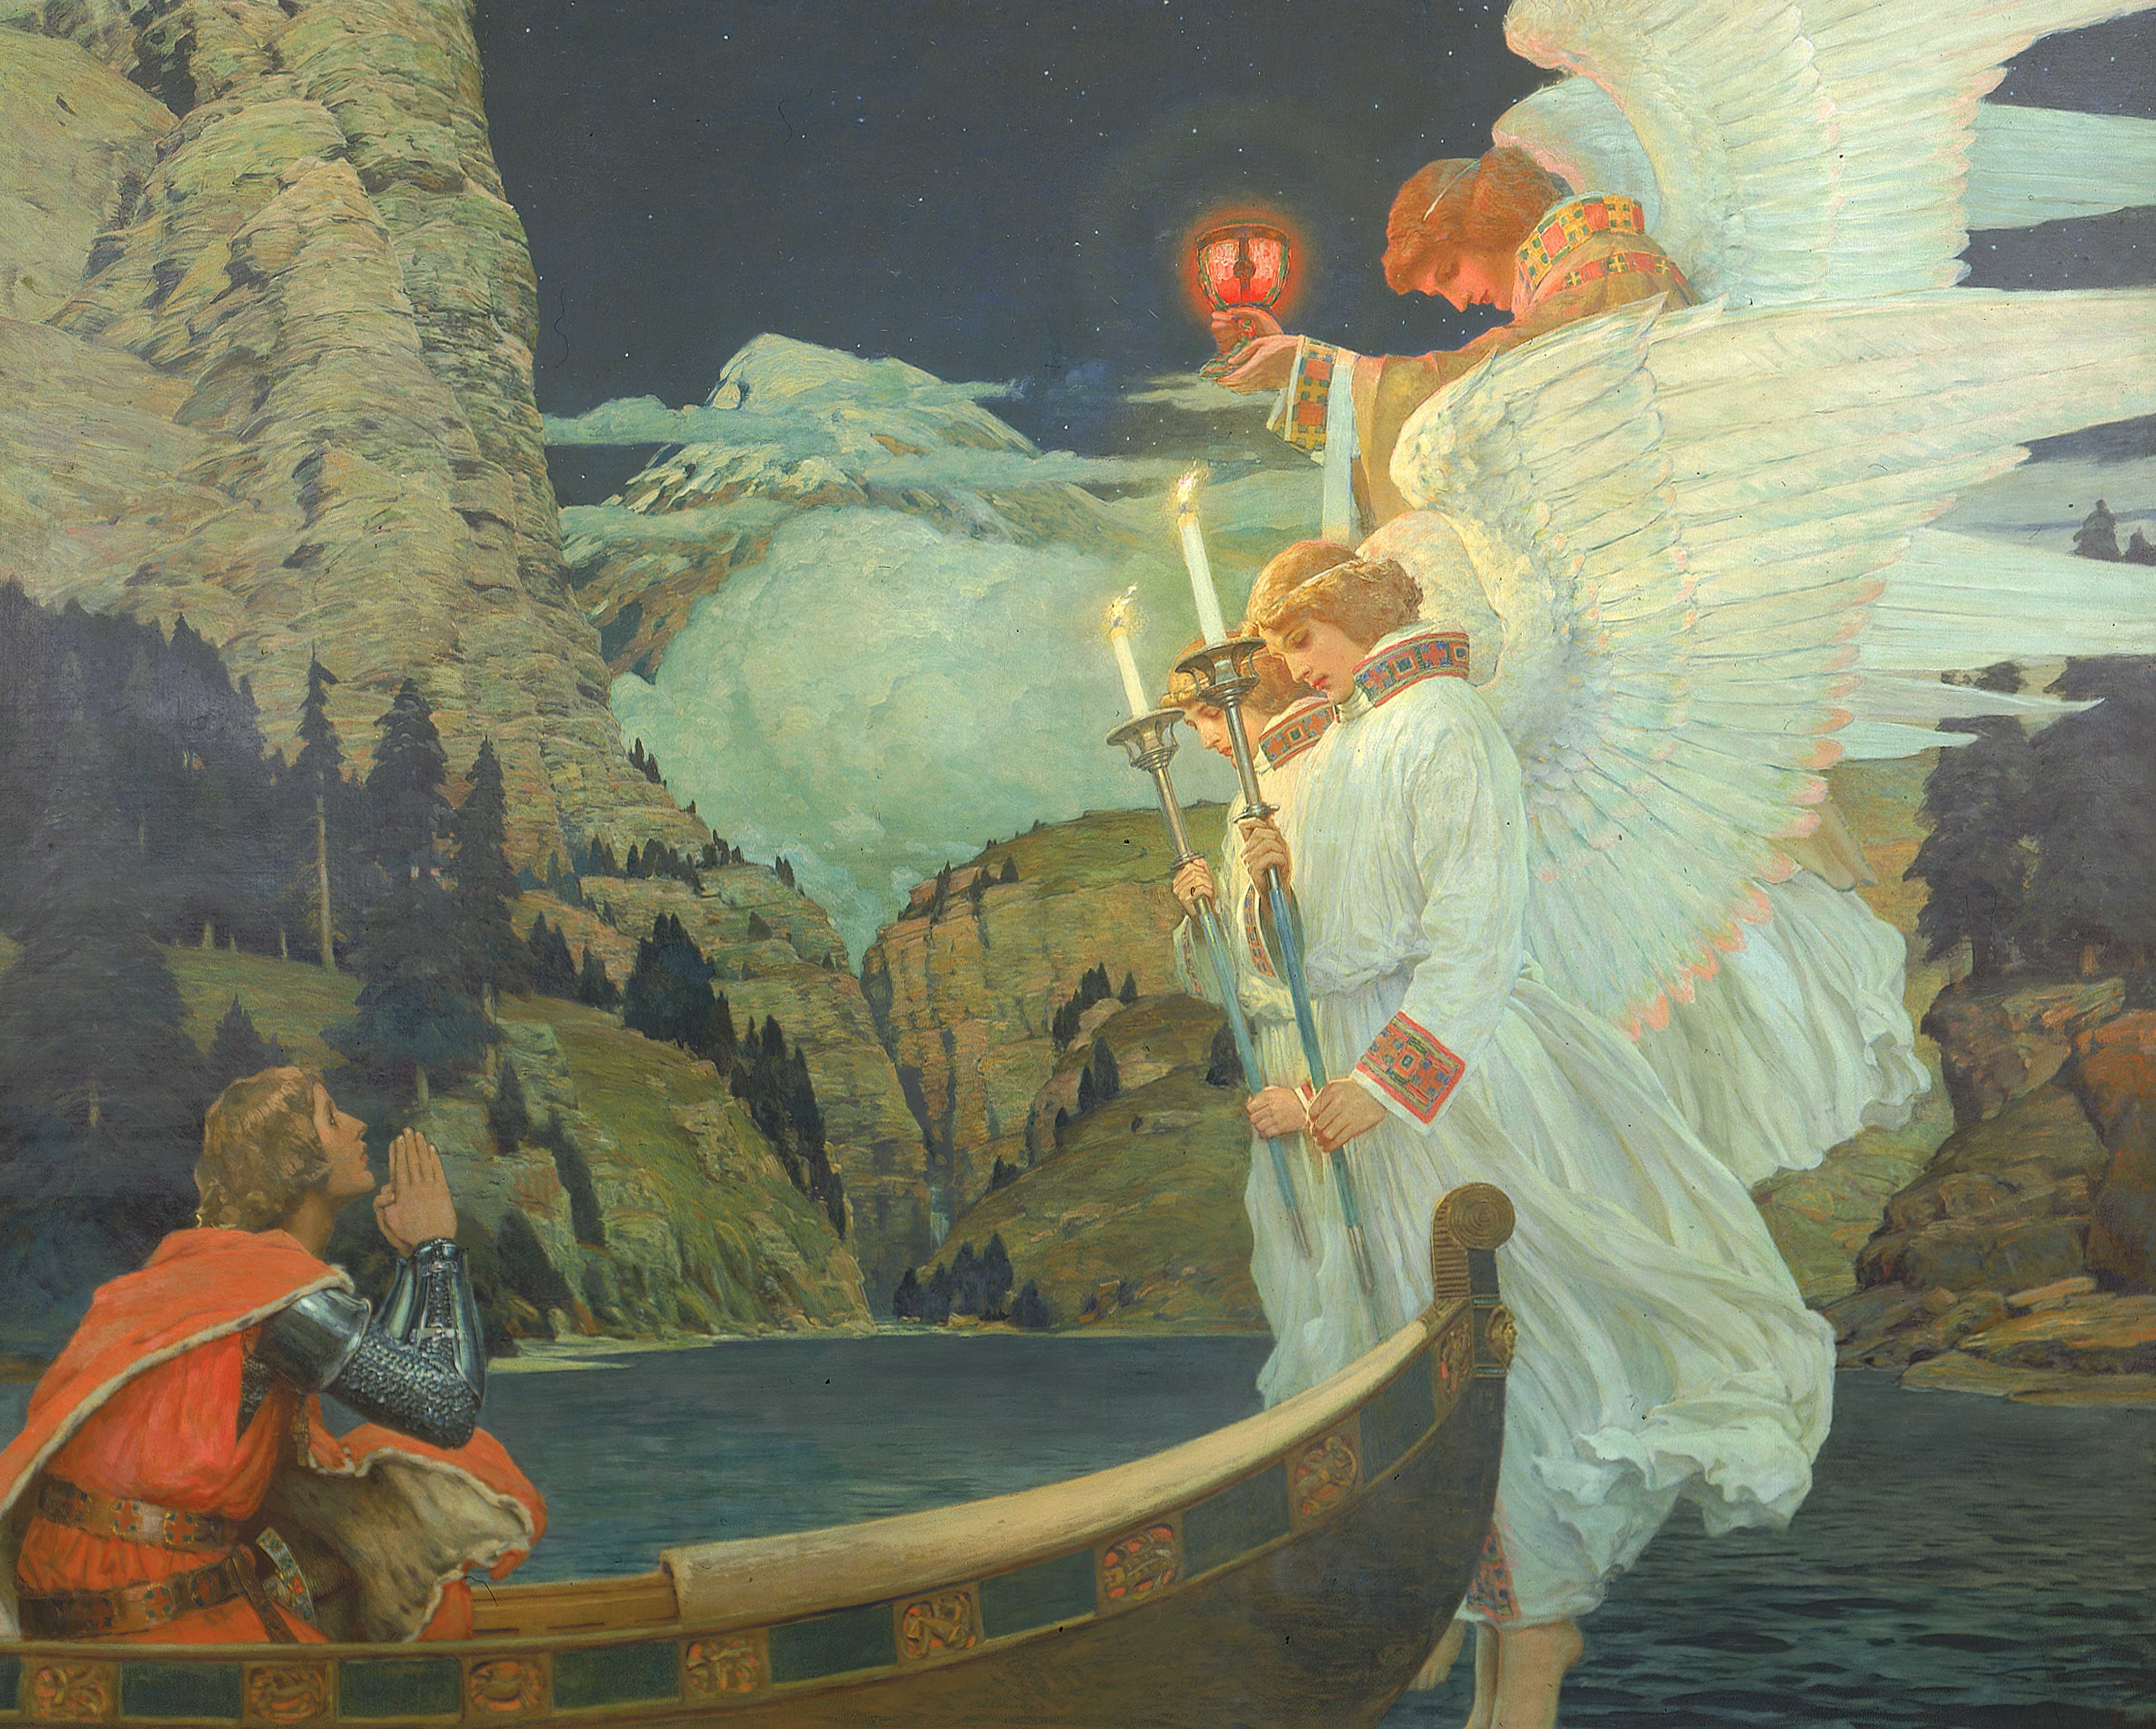 Find out more about Frederick Judd Waugh - The Knight of the Holy Grail